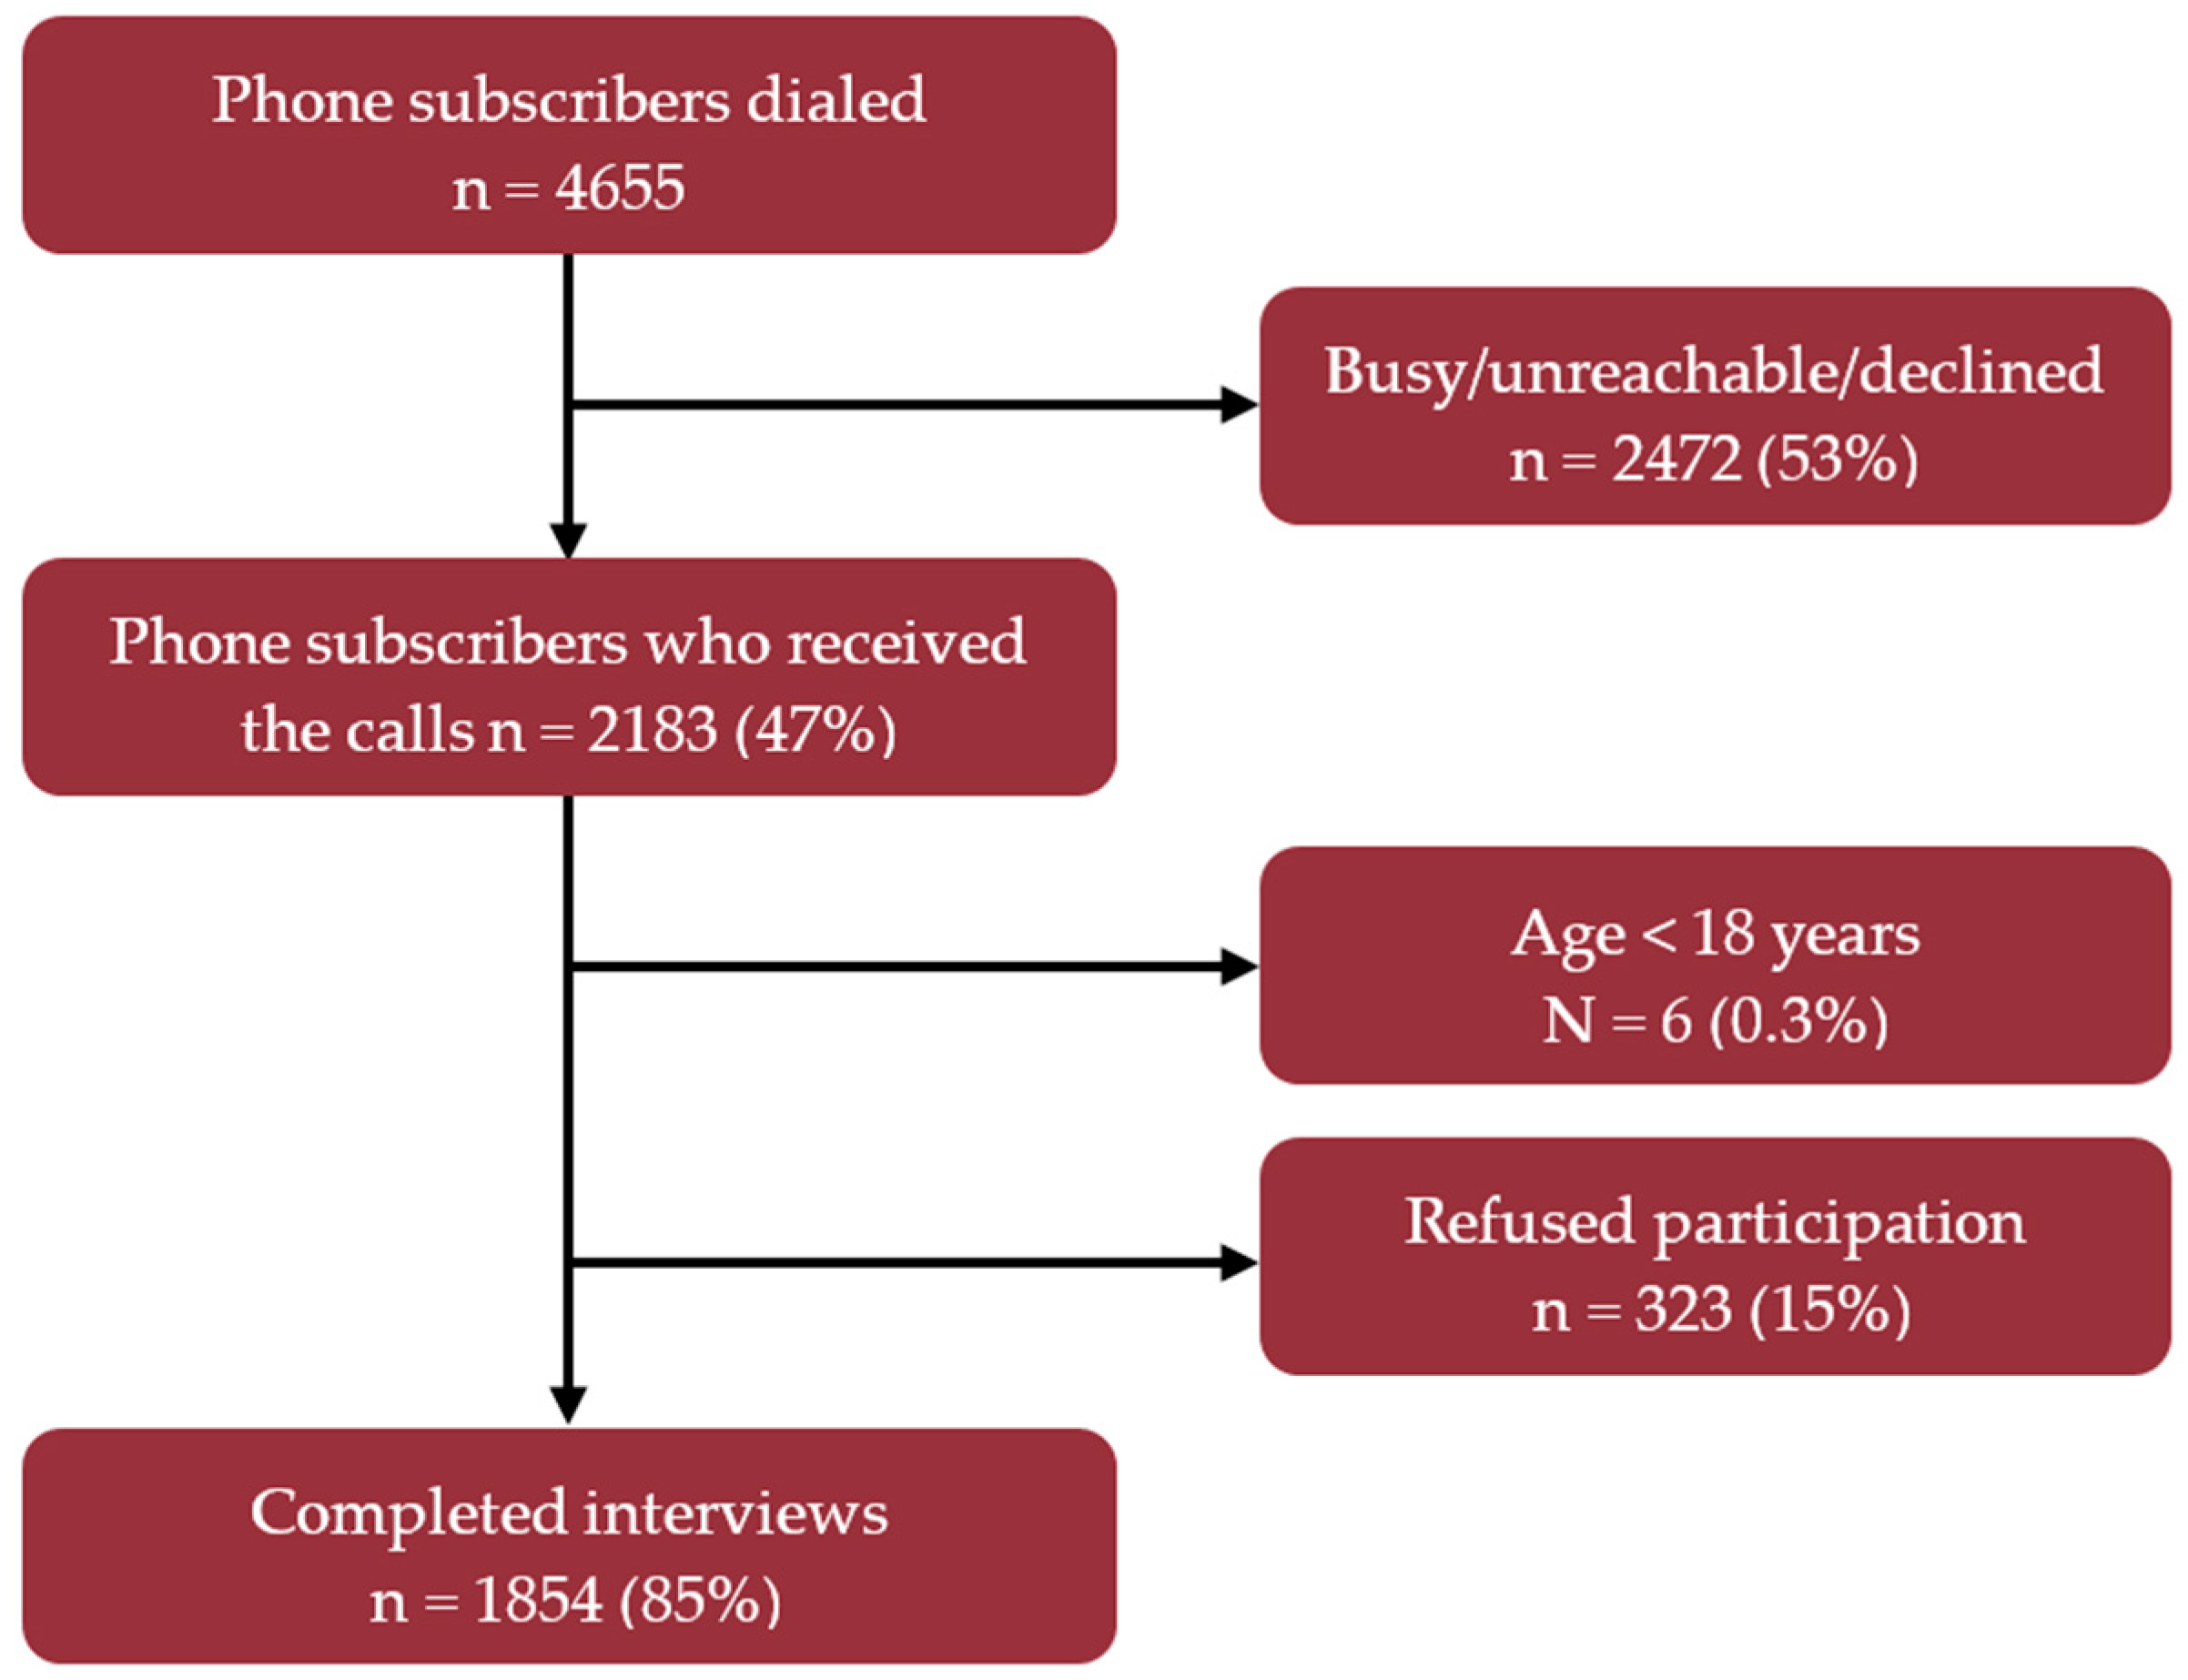 Antibiotics | Free Full-Text | Antibiotics Use and Its Knowledge in the  Community: A Mobile Phone Survey during the COVID-19 Pandemic in Bangladesh  | HTML